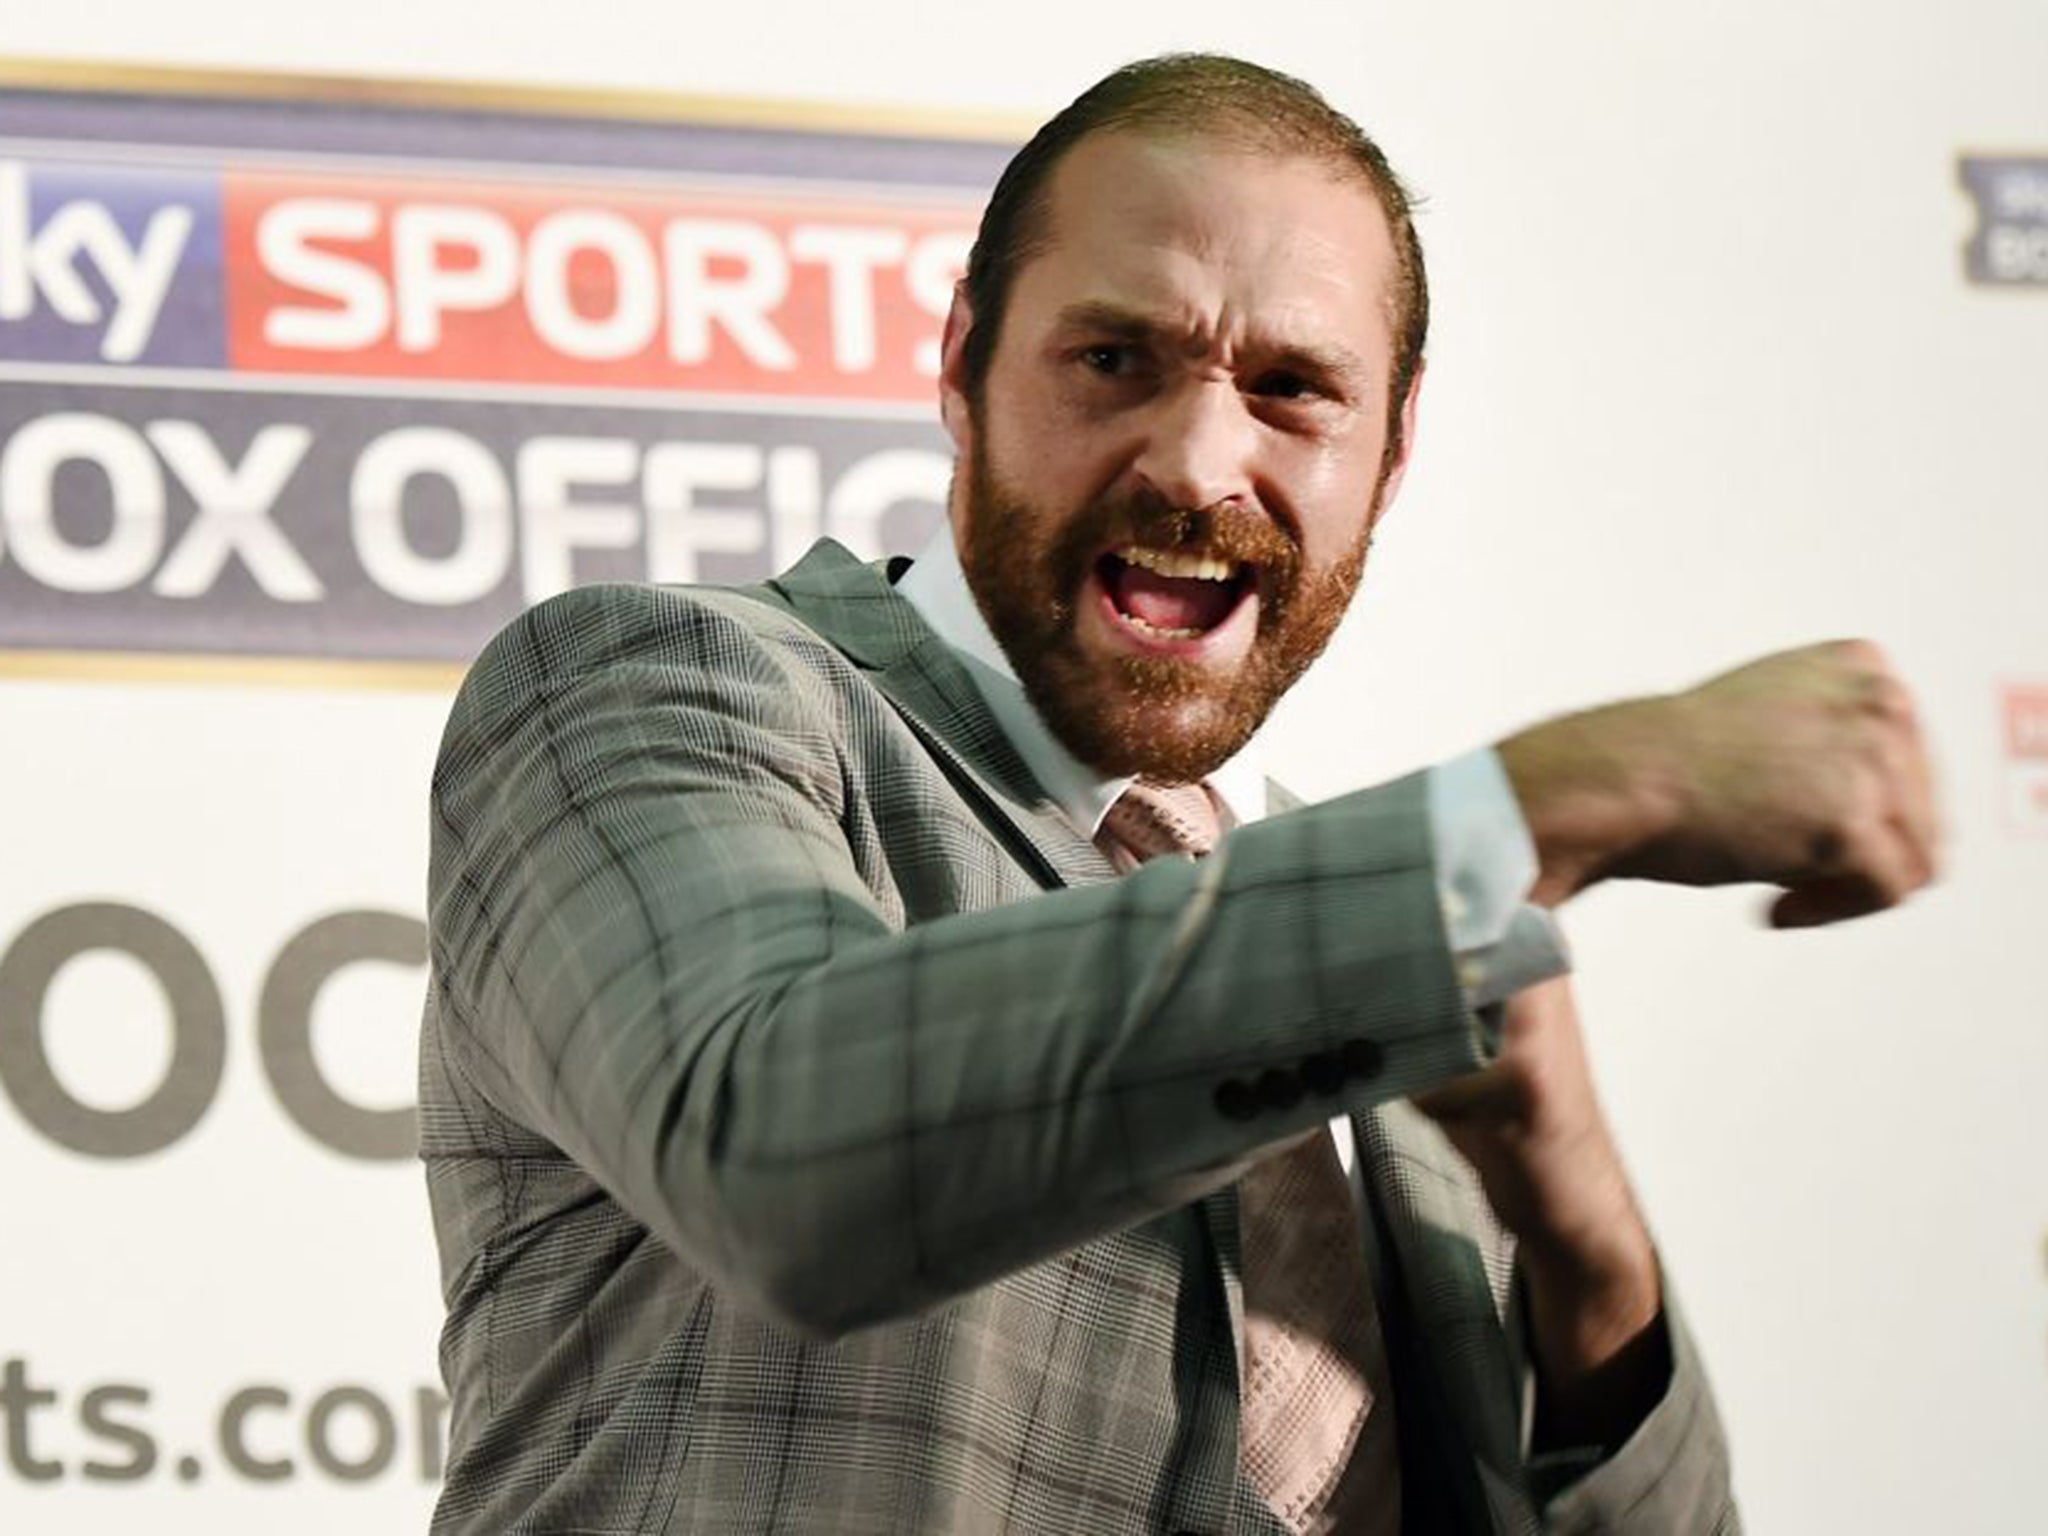 Tyson Fury clearly posed a significant threat to the current world heavyweight champion